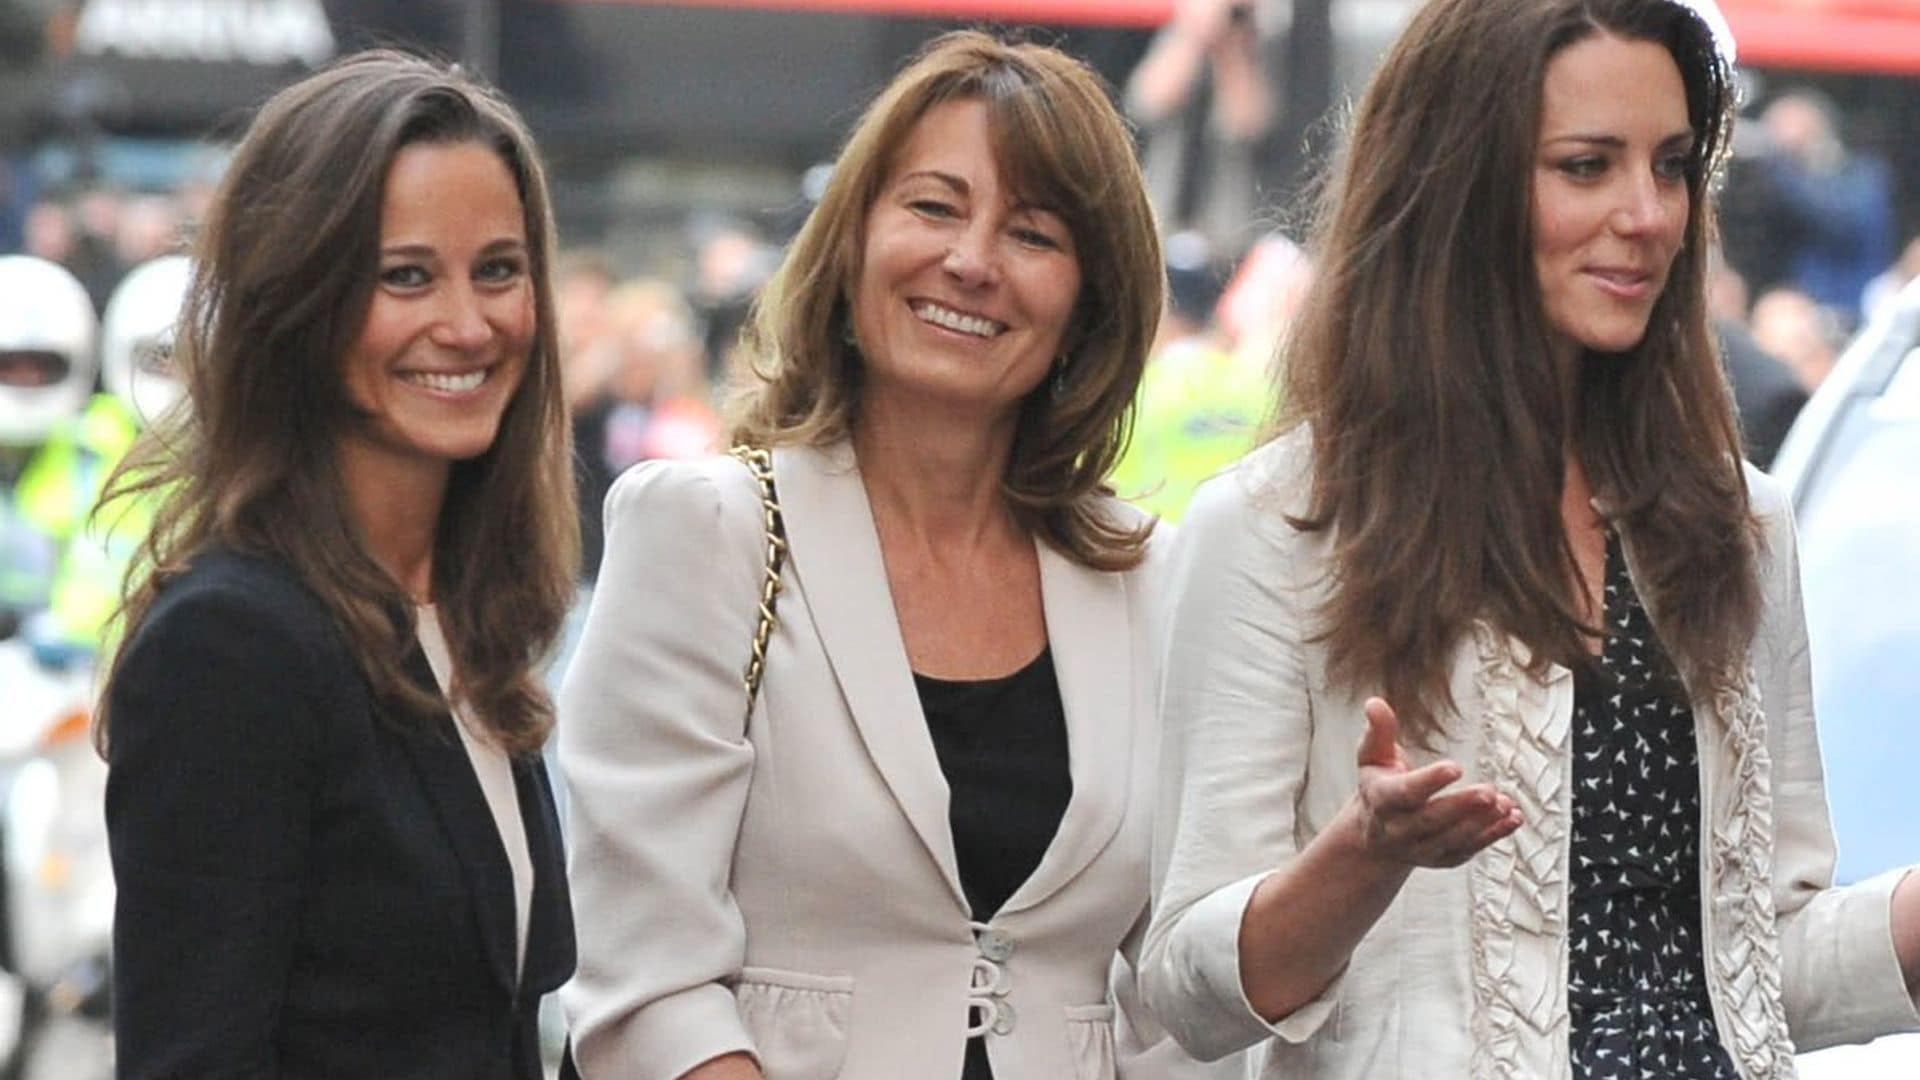 Kate Middleton’s mom wants this holiday decoration to make her grandchildren laugh